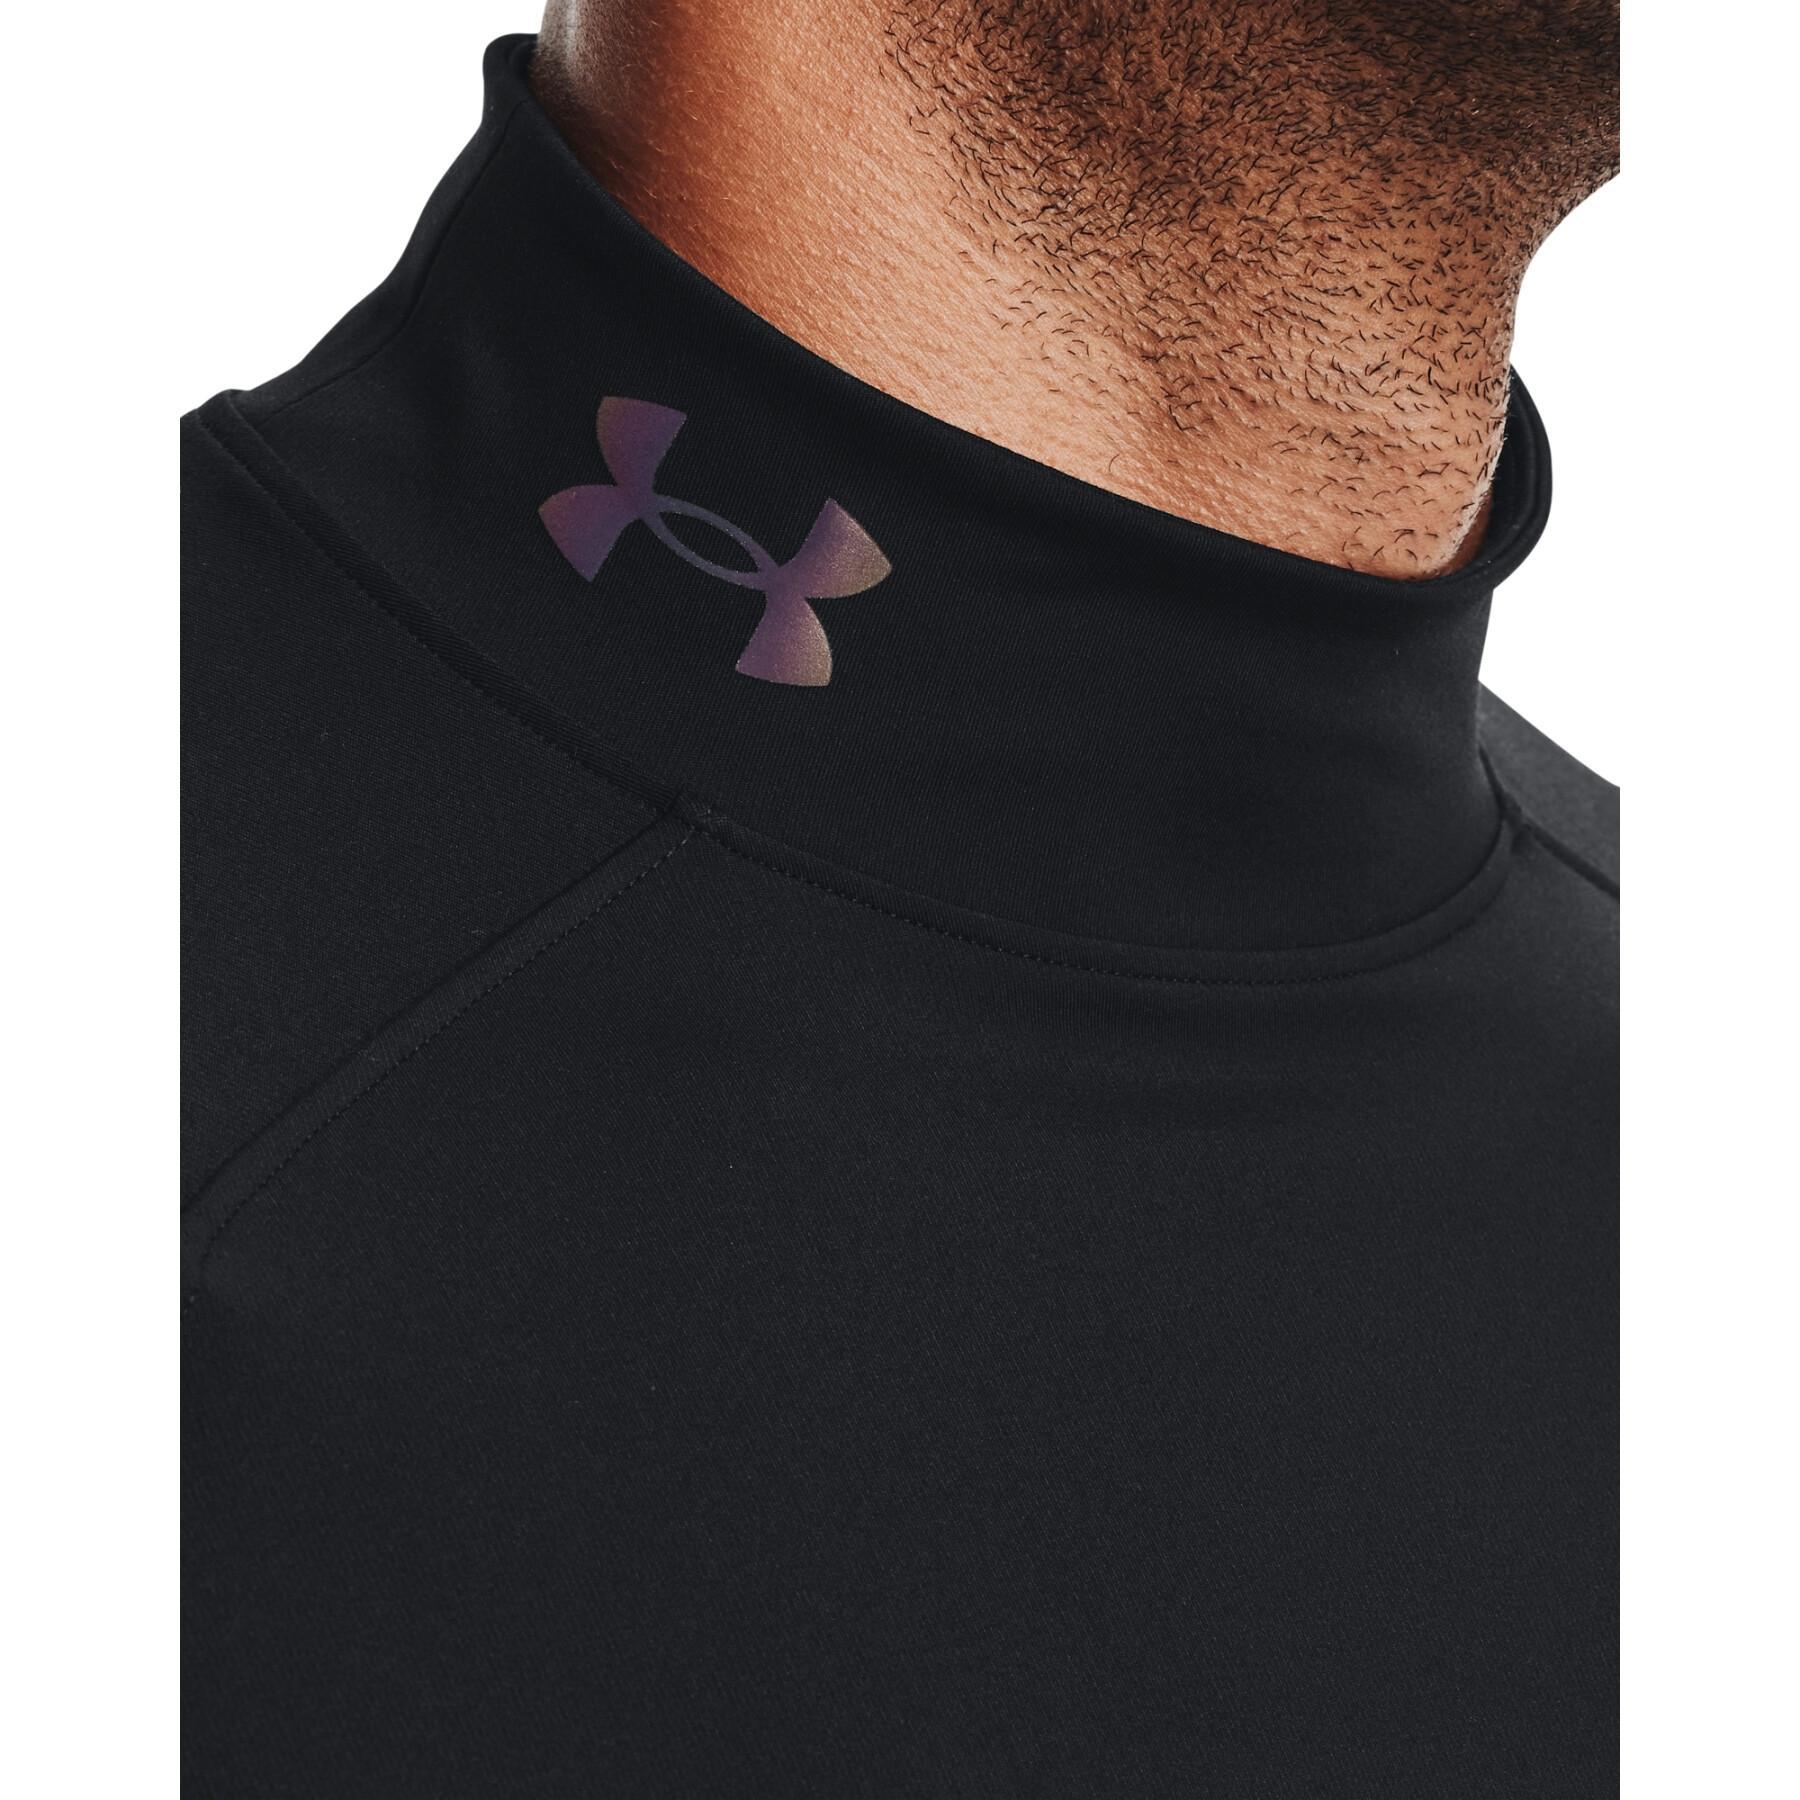 Under shirt with high collar Under Armour Rush™ - ColdGear®